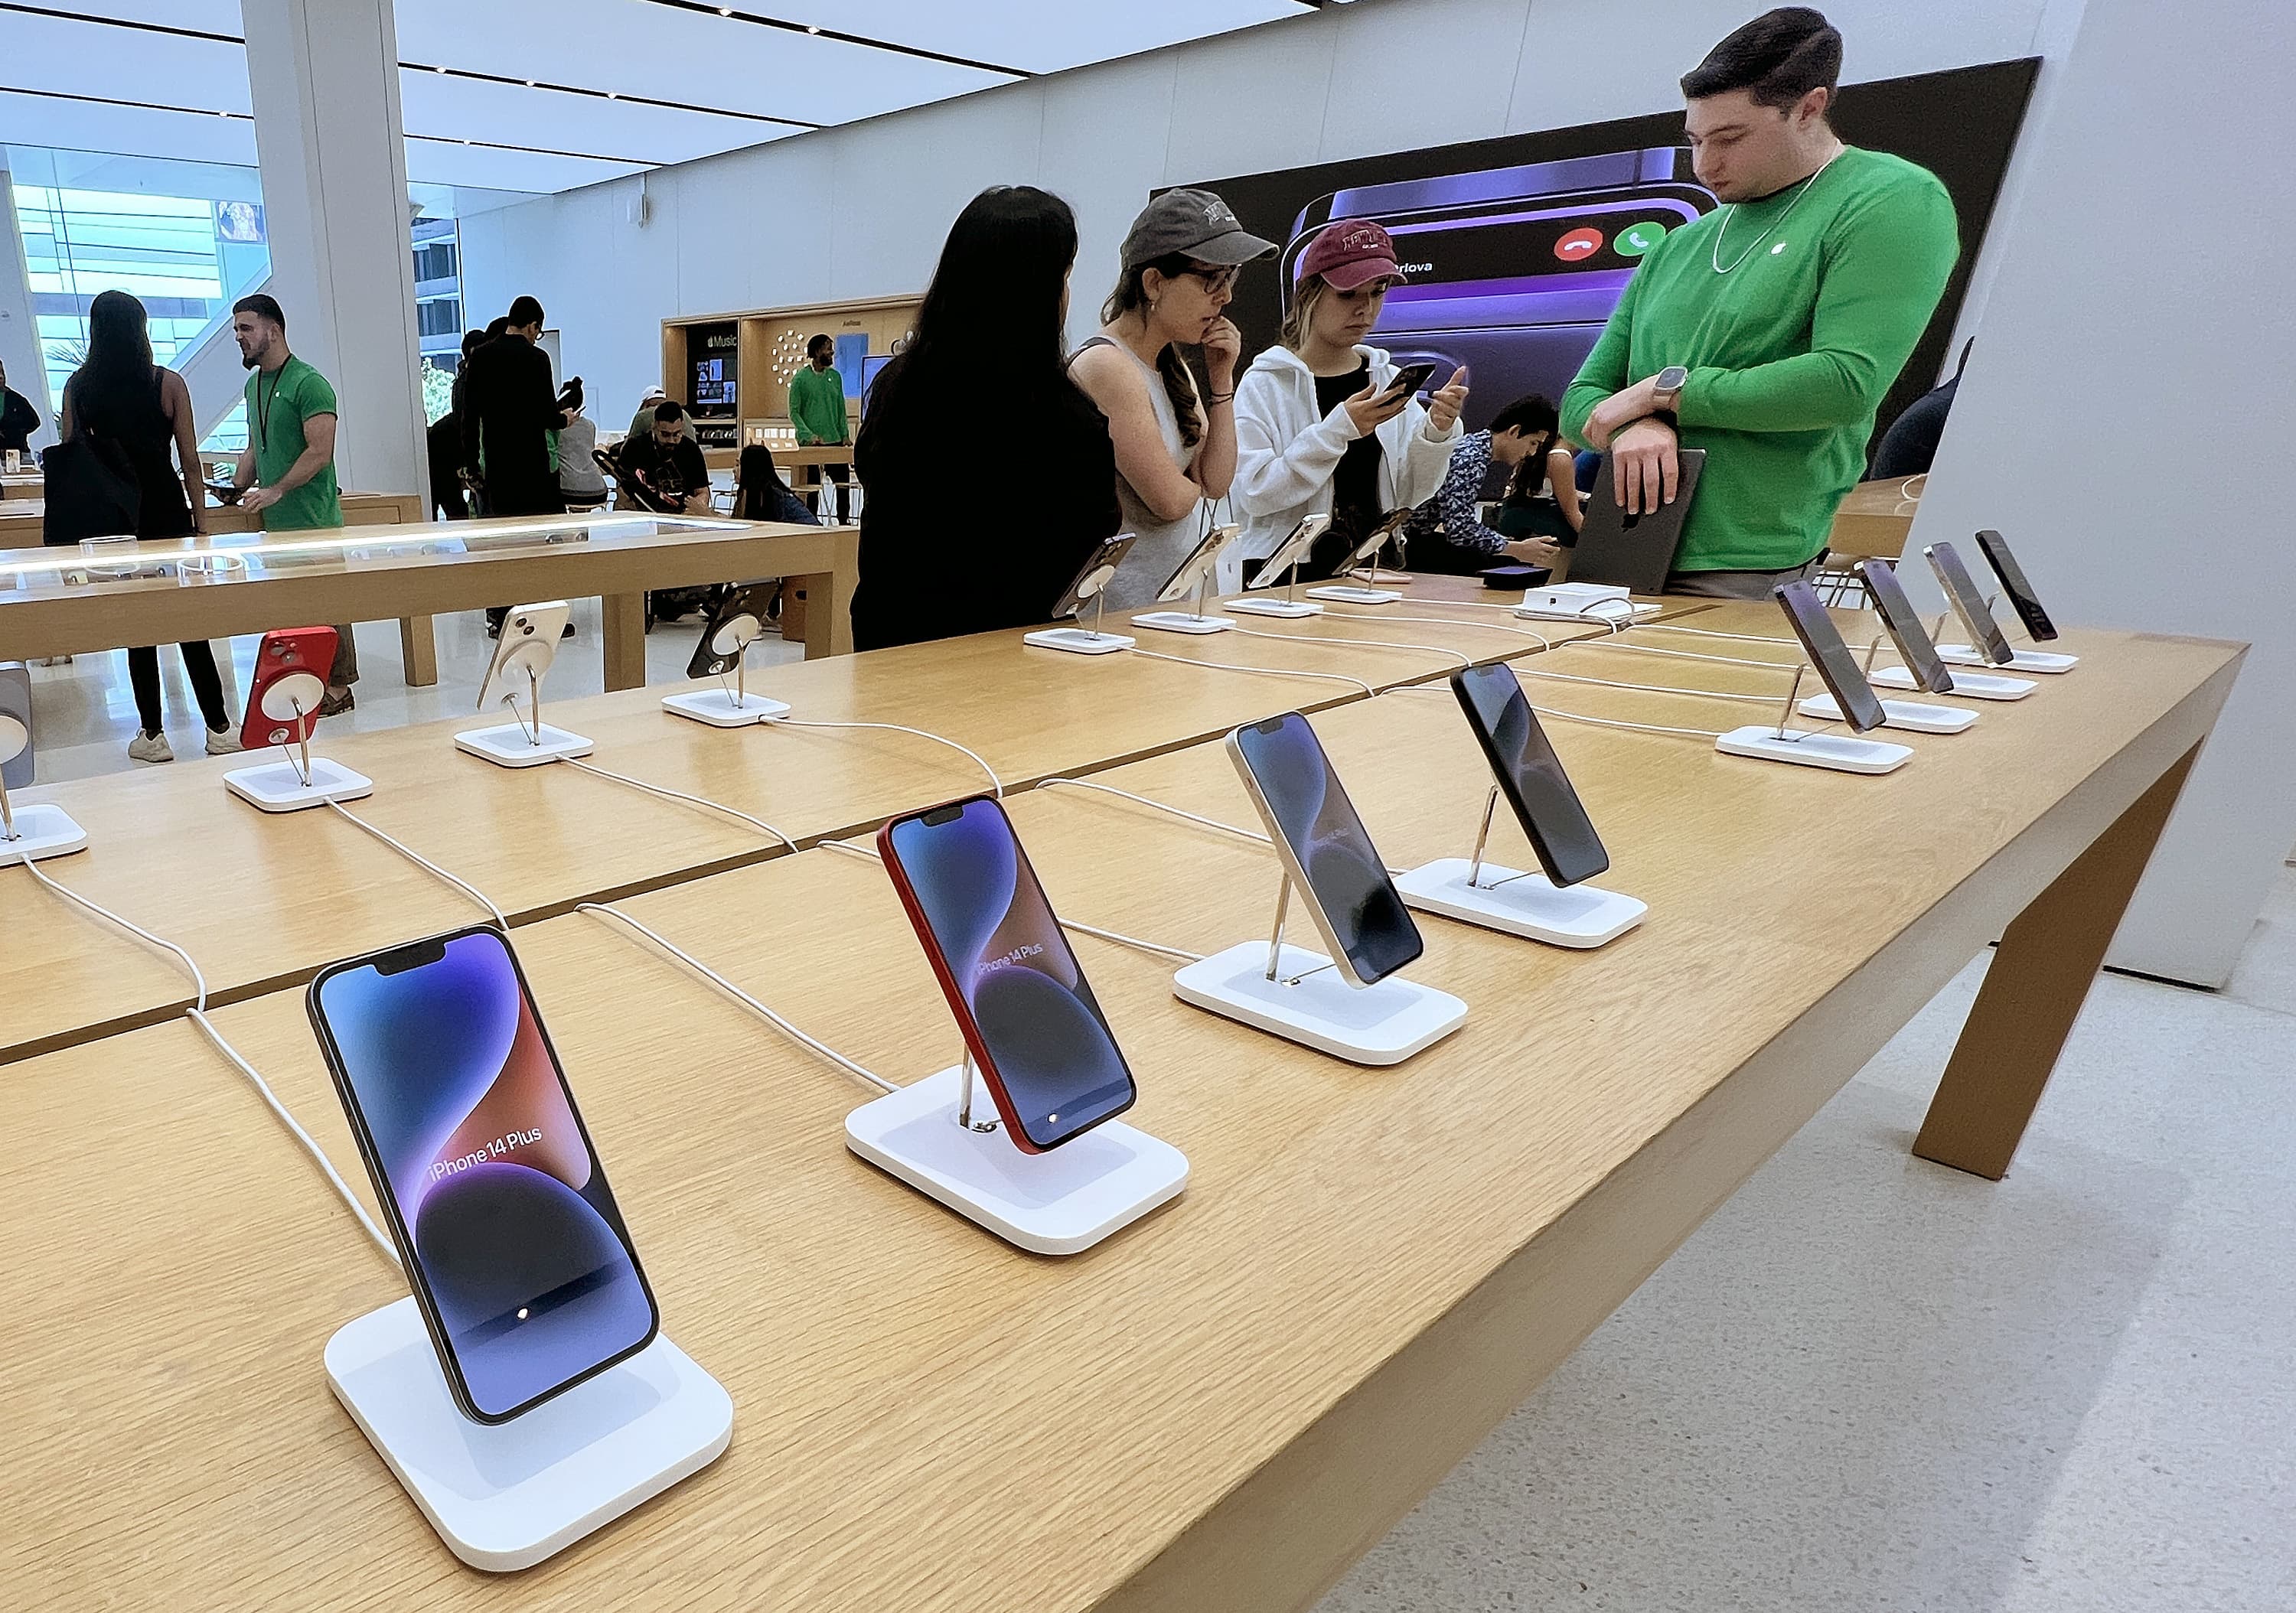 Apple's quarter eases concerns about mobile device demand, with a China sales beat to boot